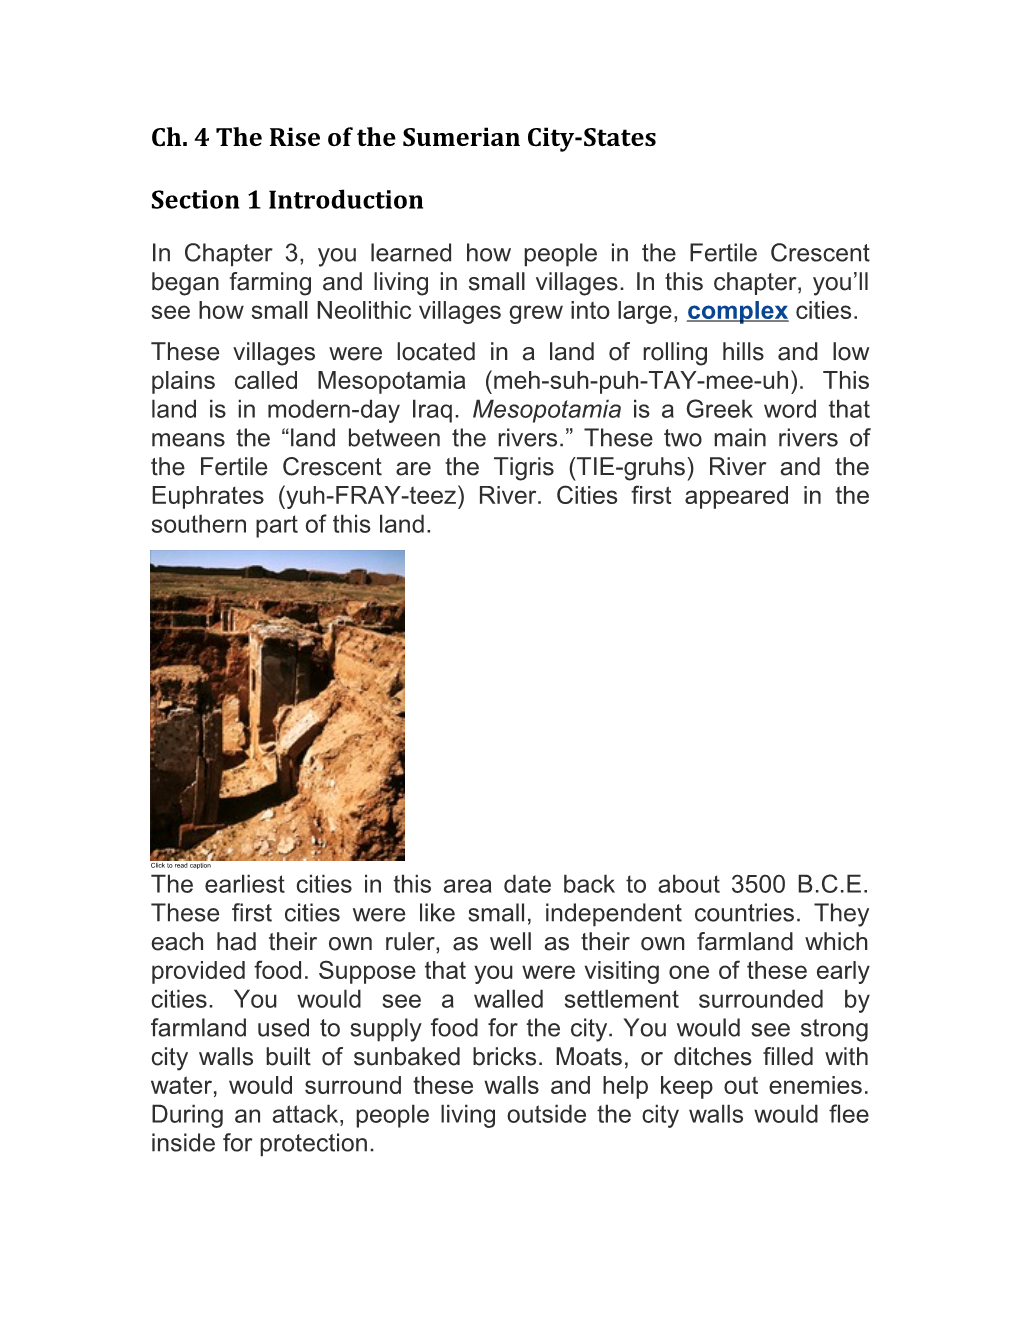 Ch. 4 the Rise of the Sumerian City-States